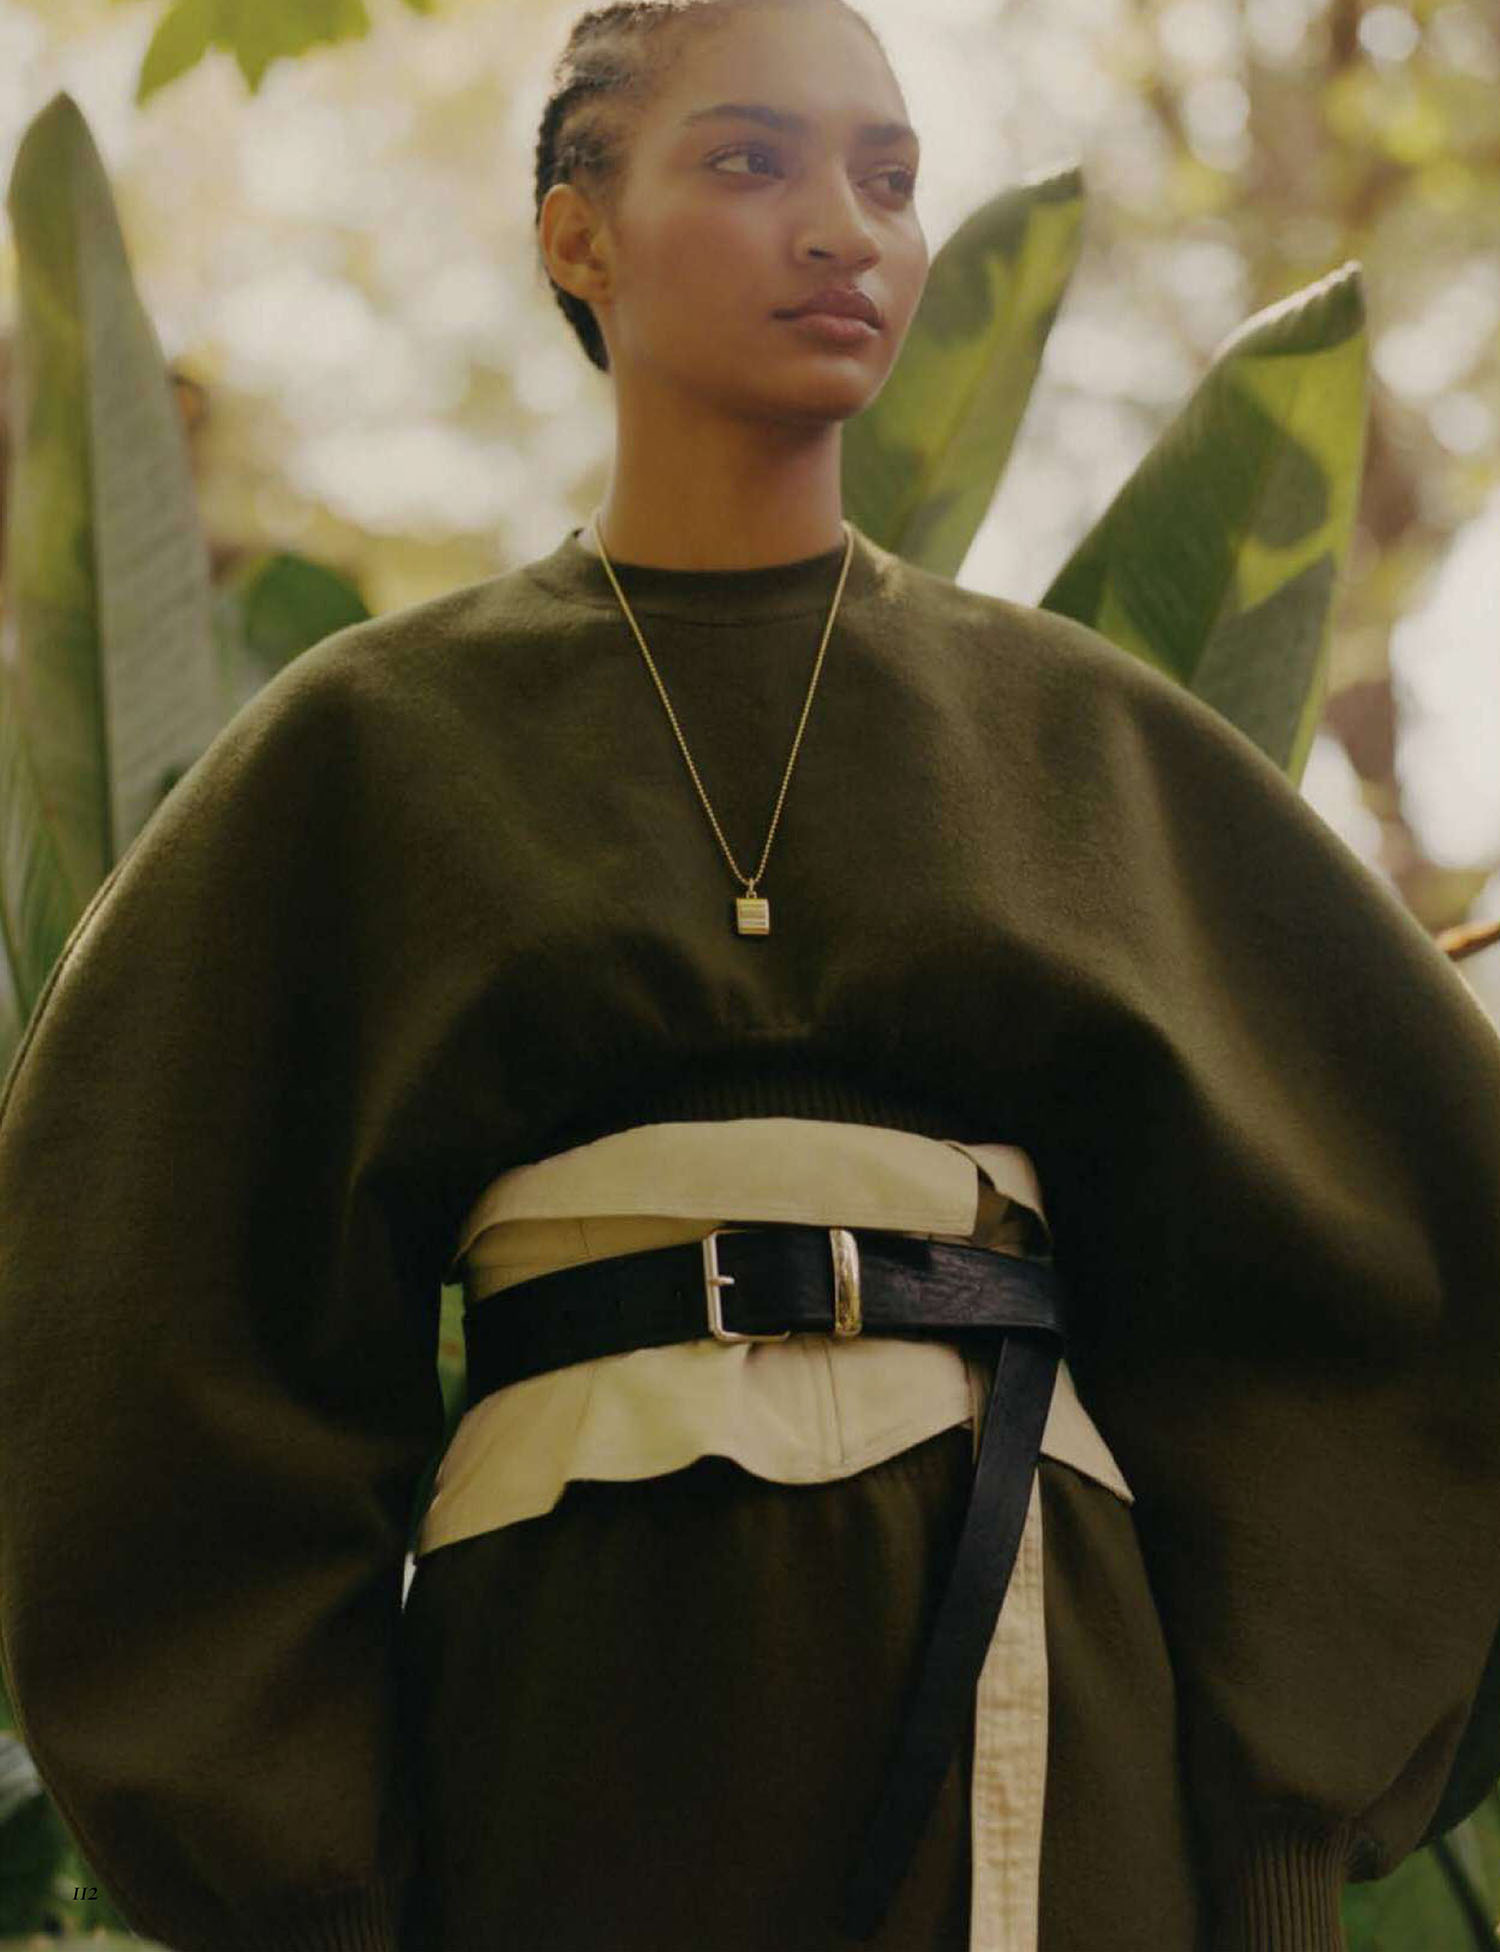 Anyelina Rosa by Peter Ash Lee for Vogue Mexico & Latin America April 2021